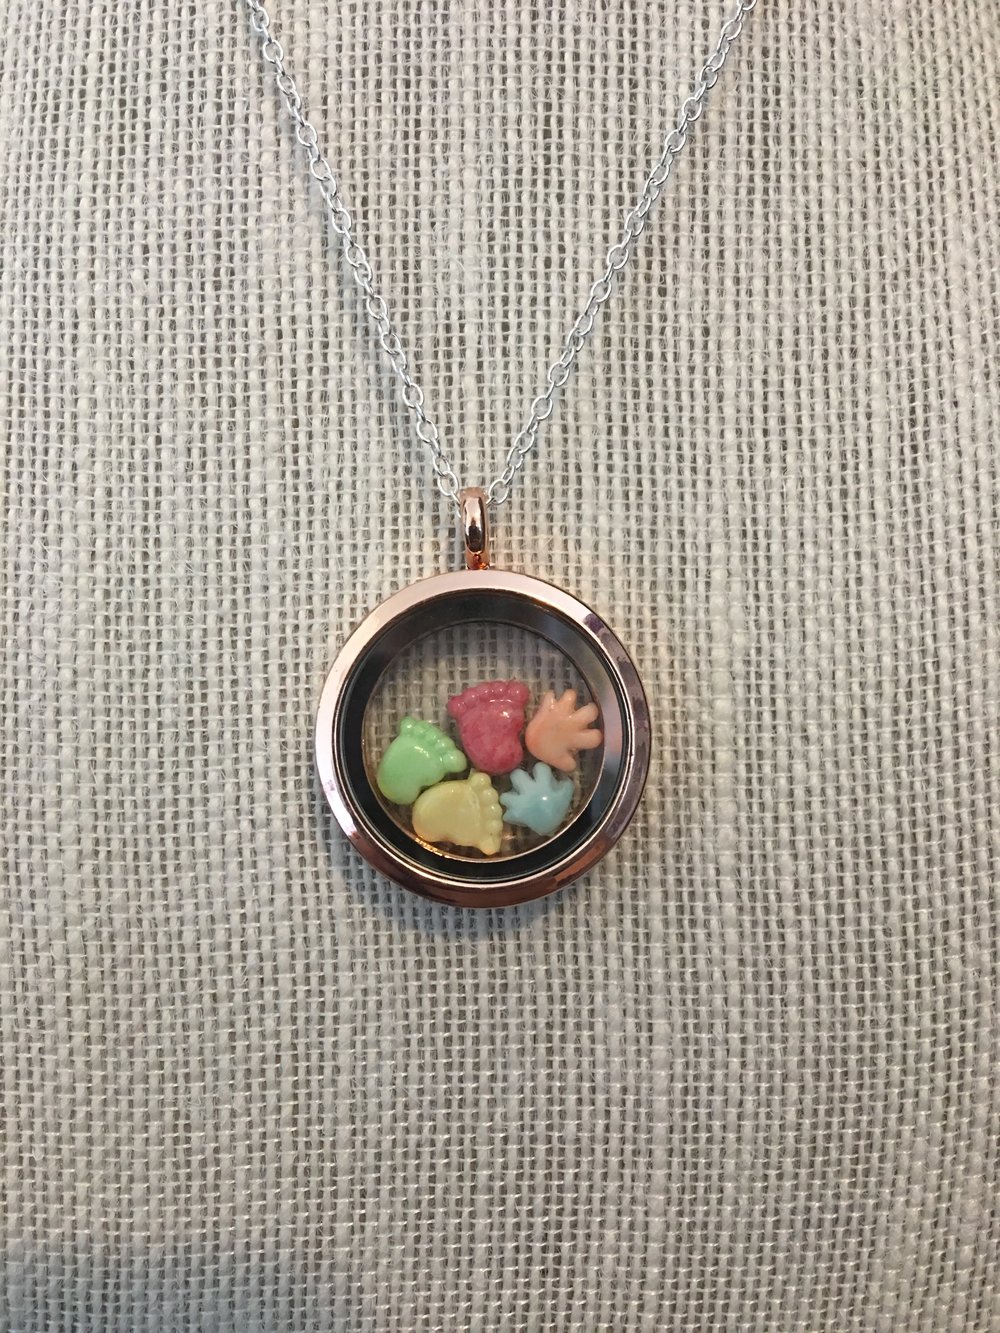 Ultimate Create your own Floating Charm Locket - Finders Keepers Creations